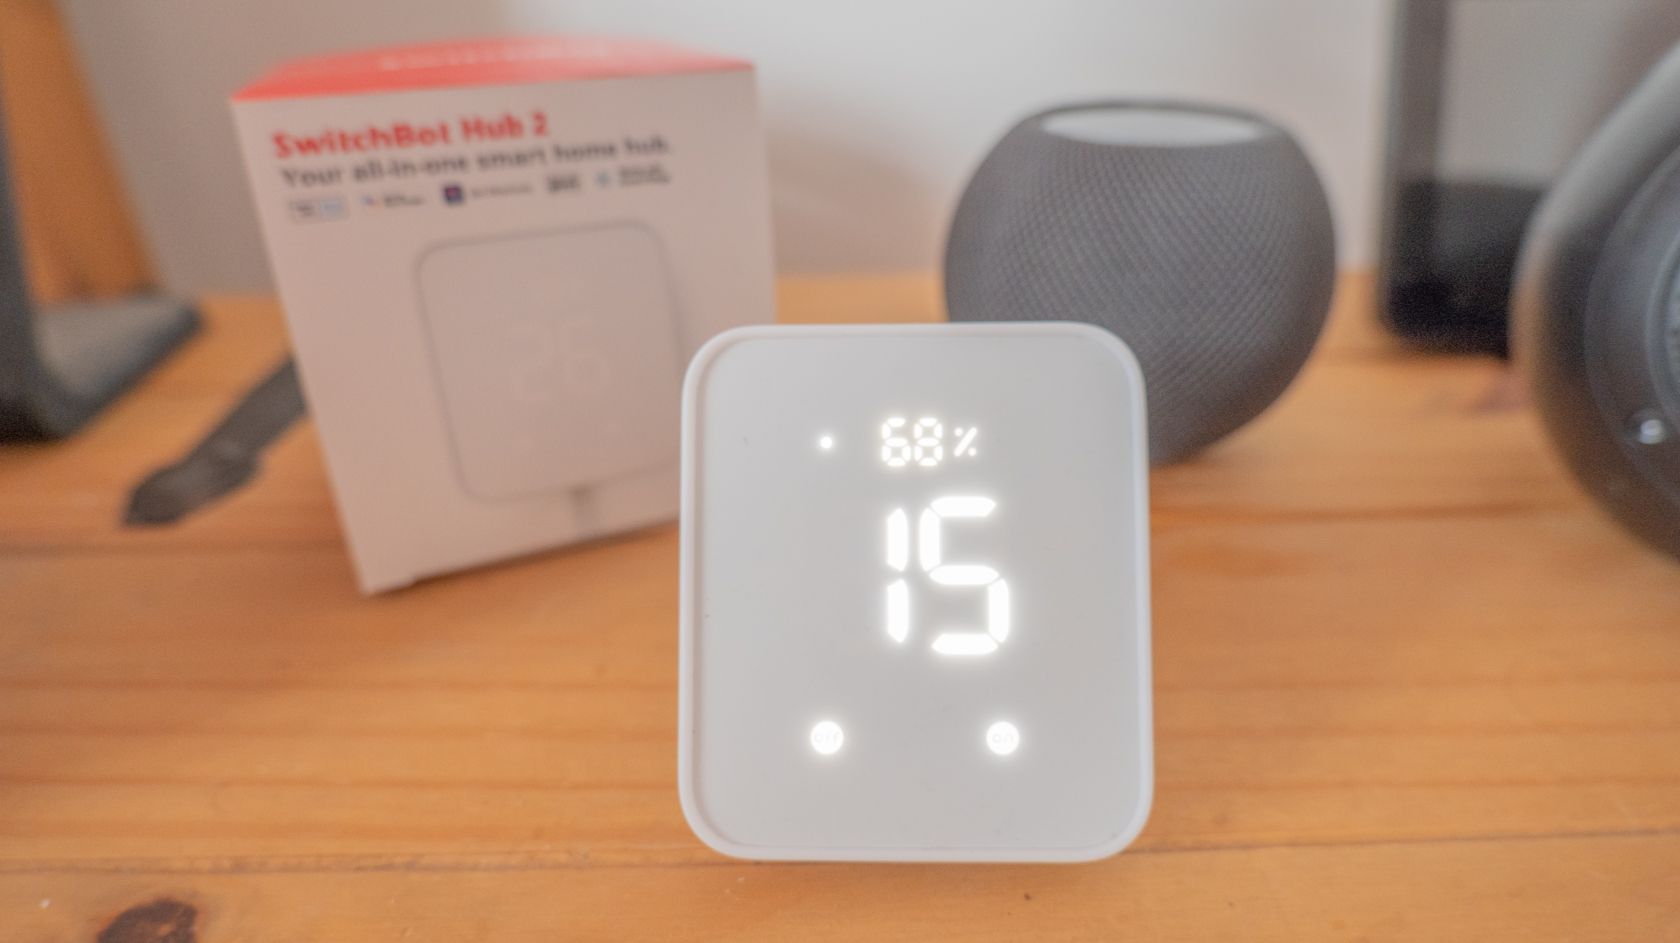 The SwitchBot Hub 2 can now connect to Home Assistant & Homekit